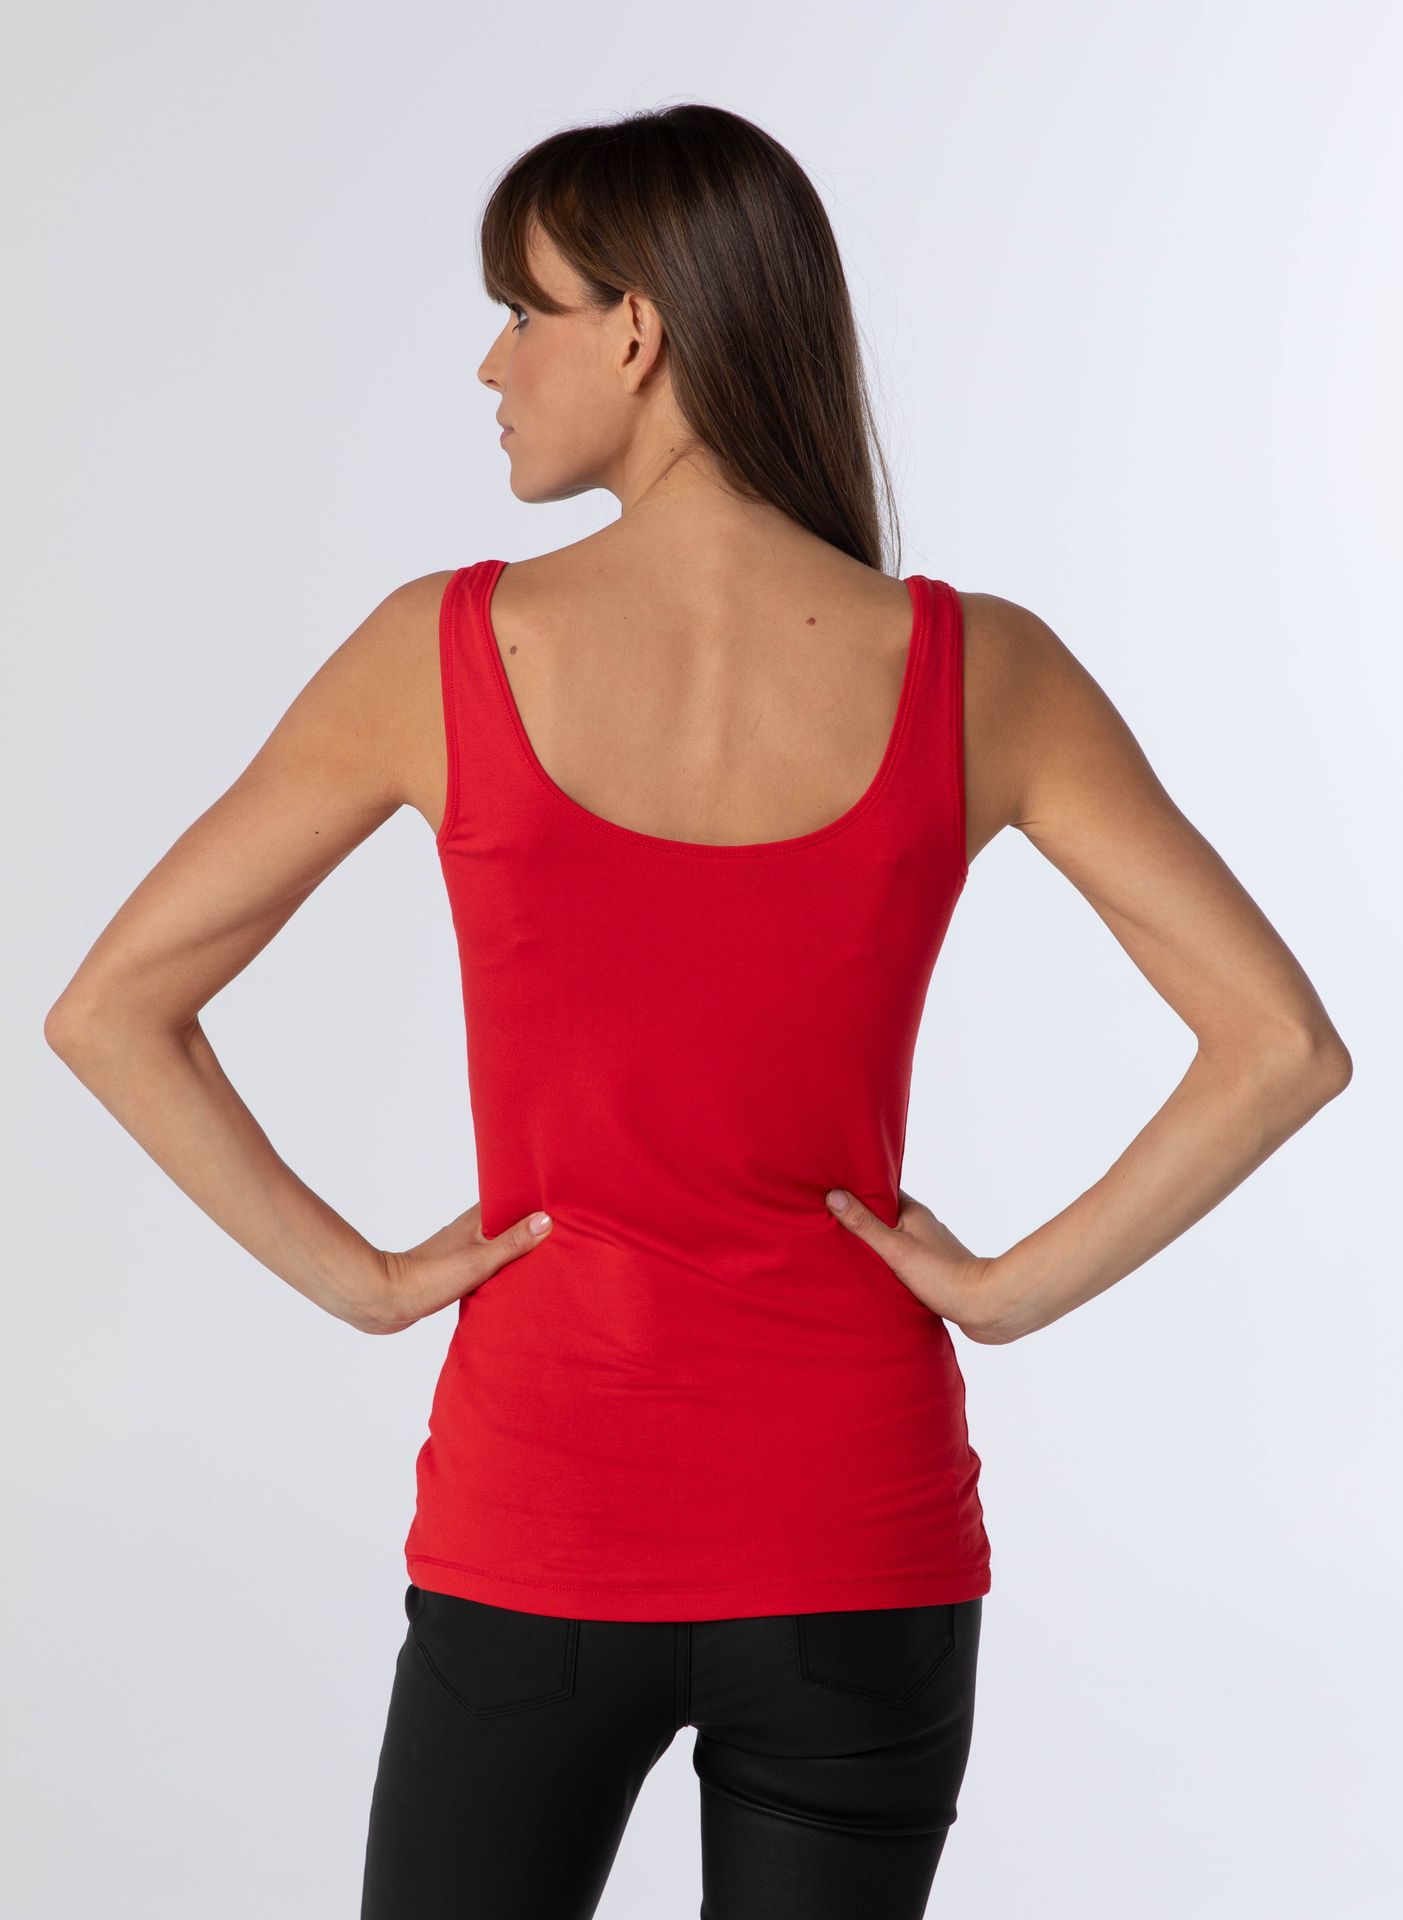 Norah Top Marianne rood  red 212247-600